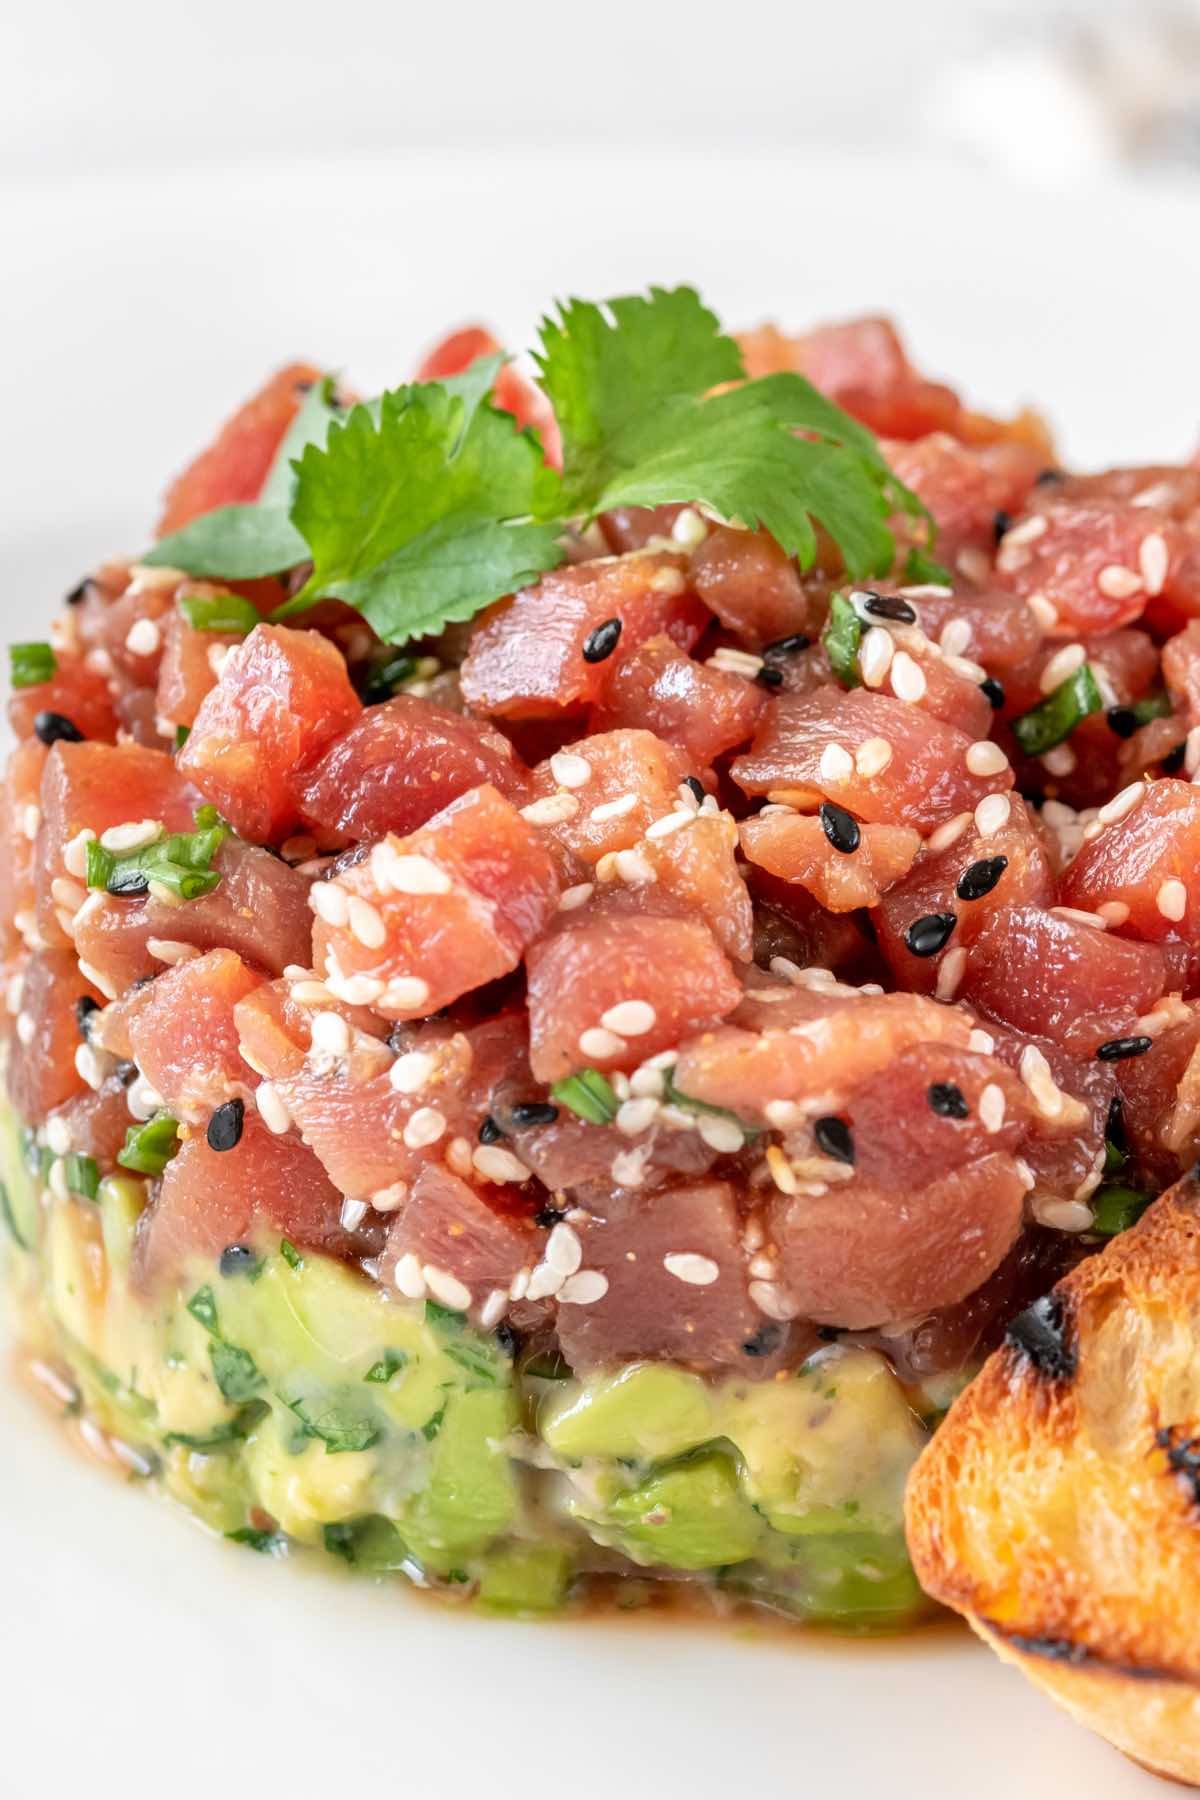 Tuna Tartare is a delectable, yet simple dish, consisting of cubes of raw, sashimi-grade tuna that has been lightly seasoned. The tuna is placed atop creamy avocado for a flavor combo that’s out of this world.